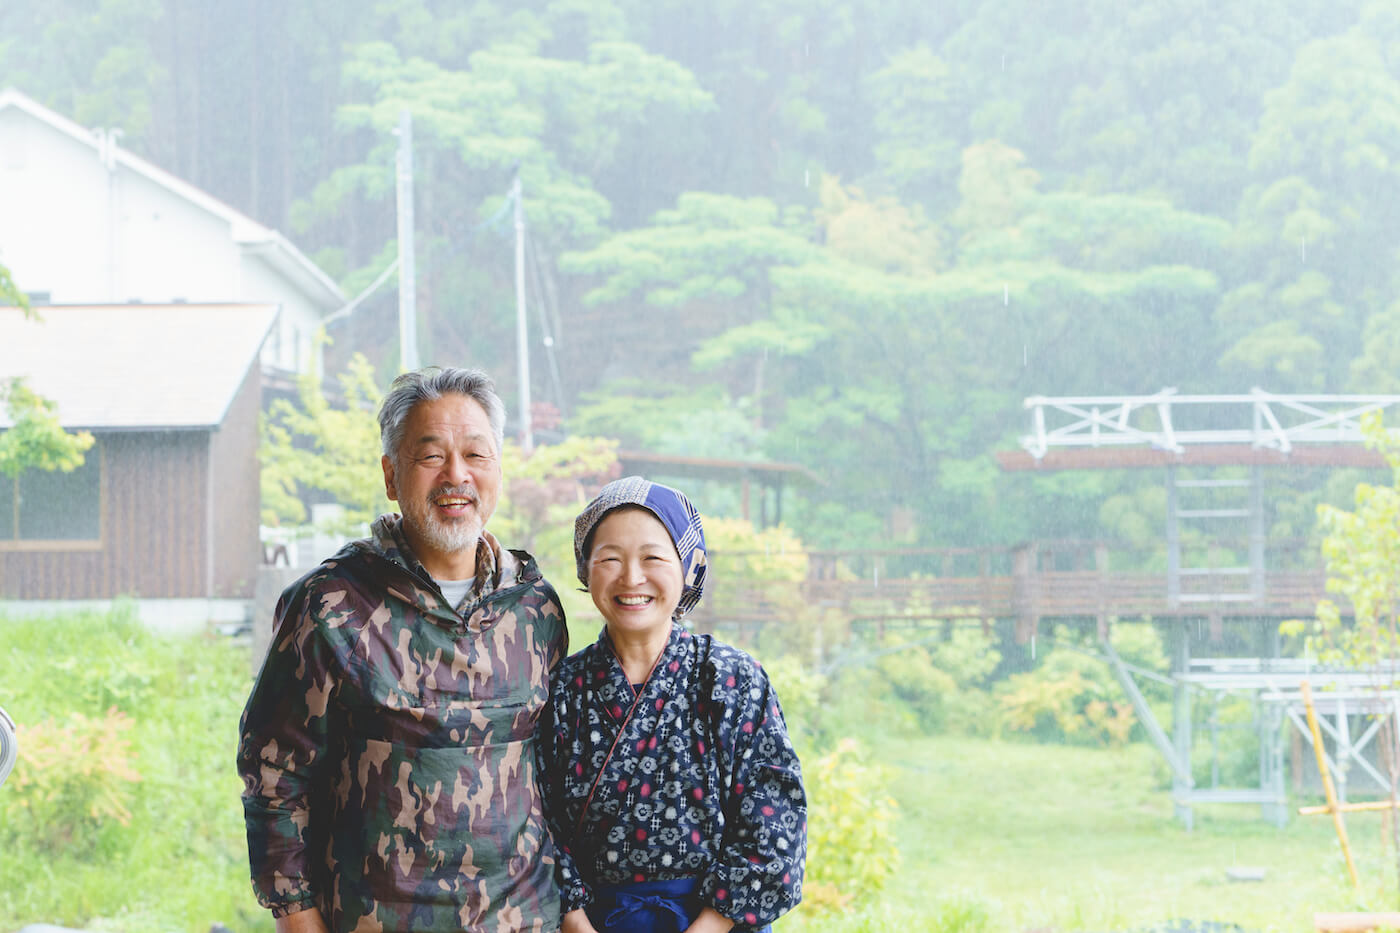 Kazuko Maeda & Yukio Ogushi - From City to Soil: The Couple that Turned a Mountain into a Gathering Spot / 前田和子&大串幸男 - 閉じた土地を生かし「農・食・人」が集う森へ